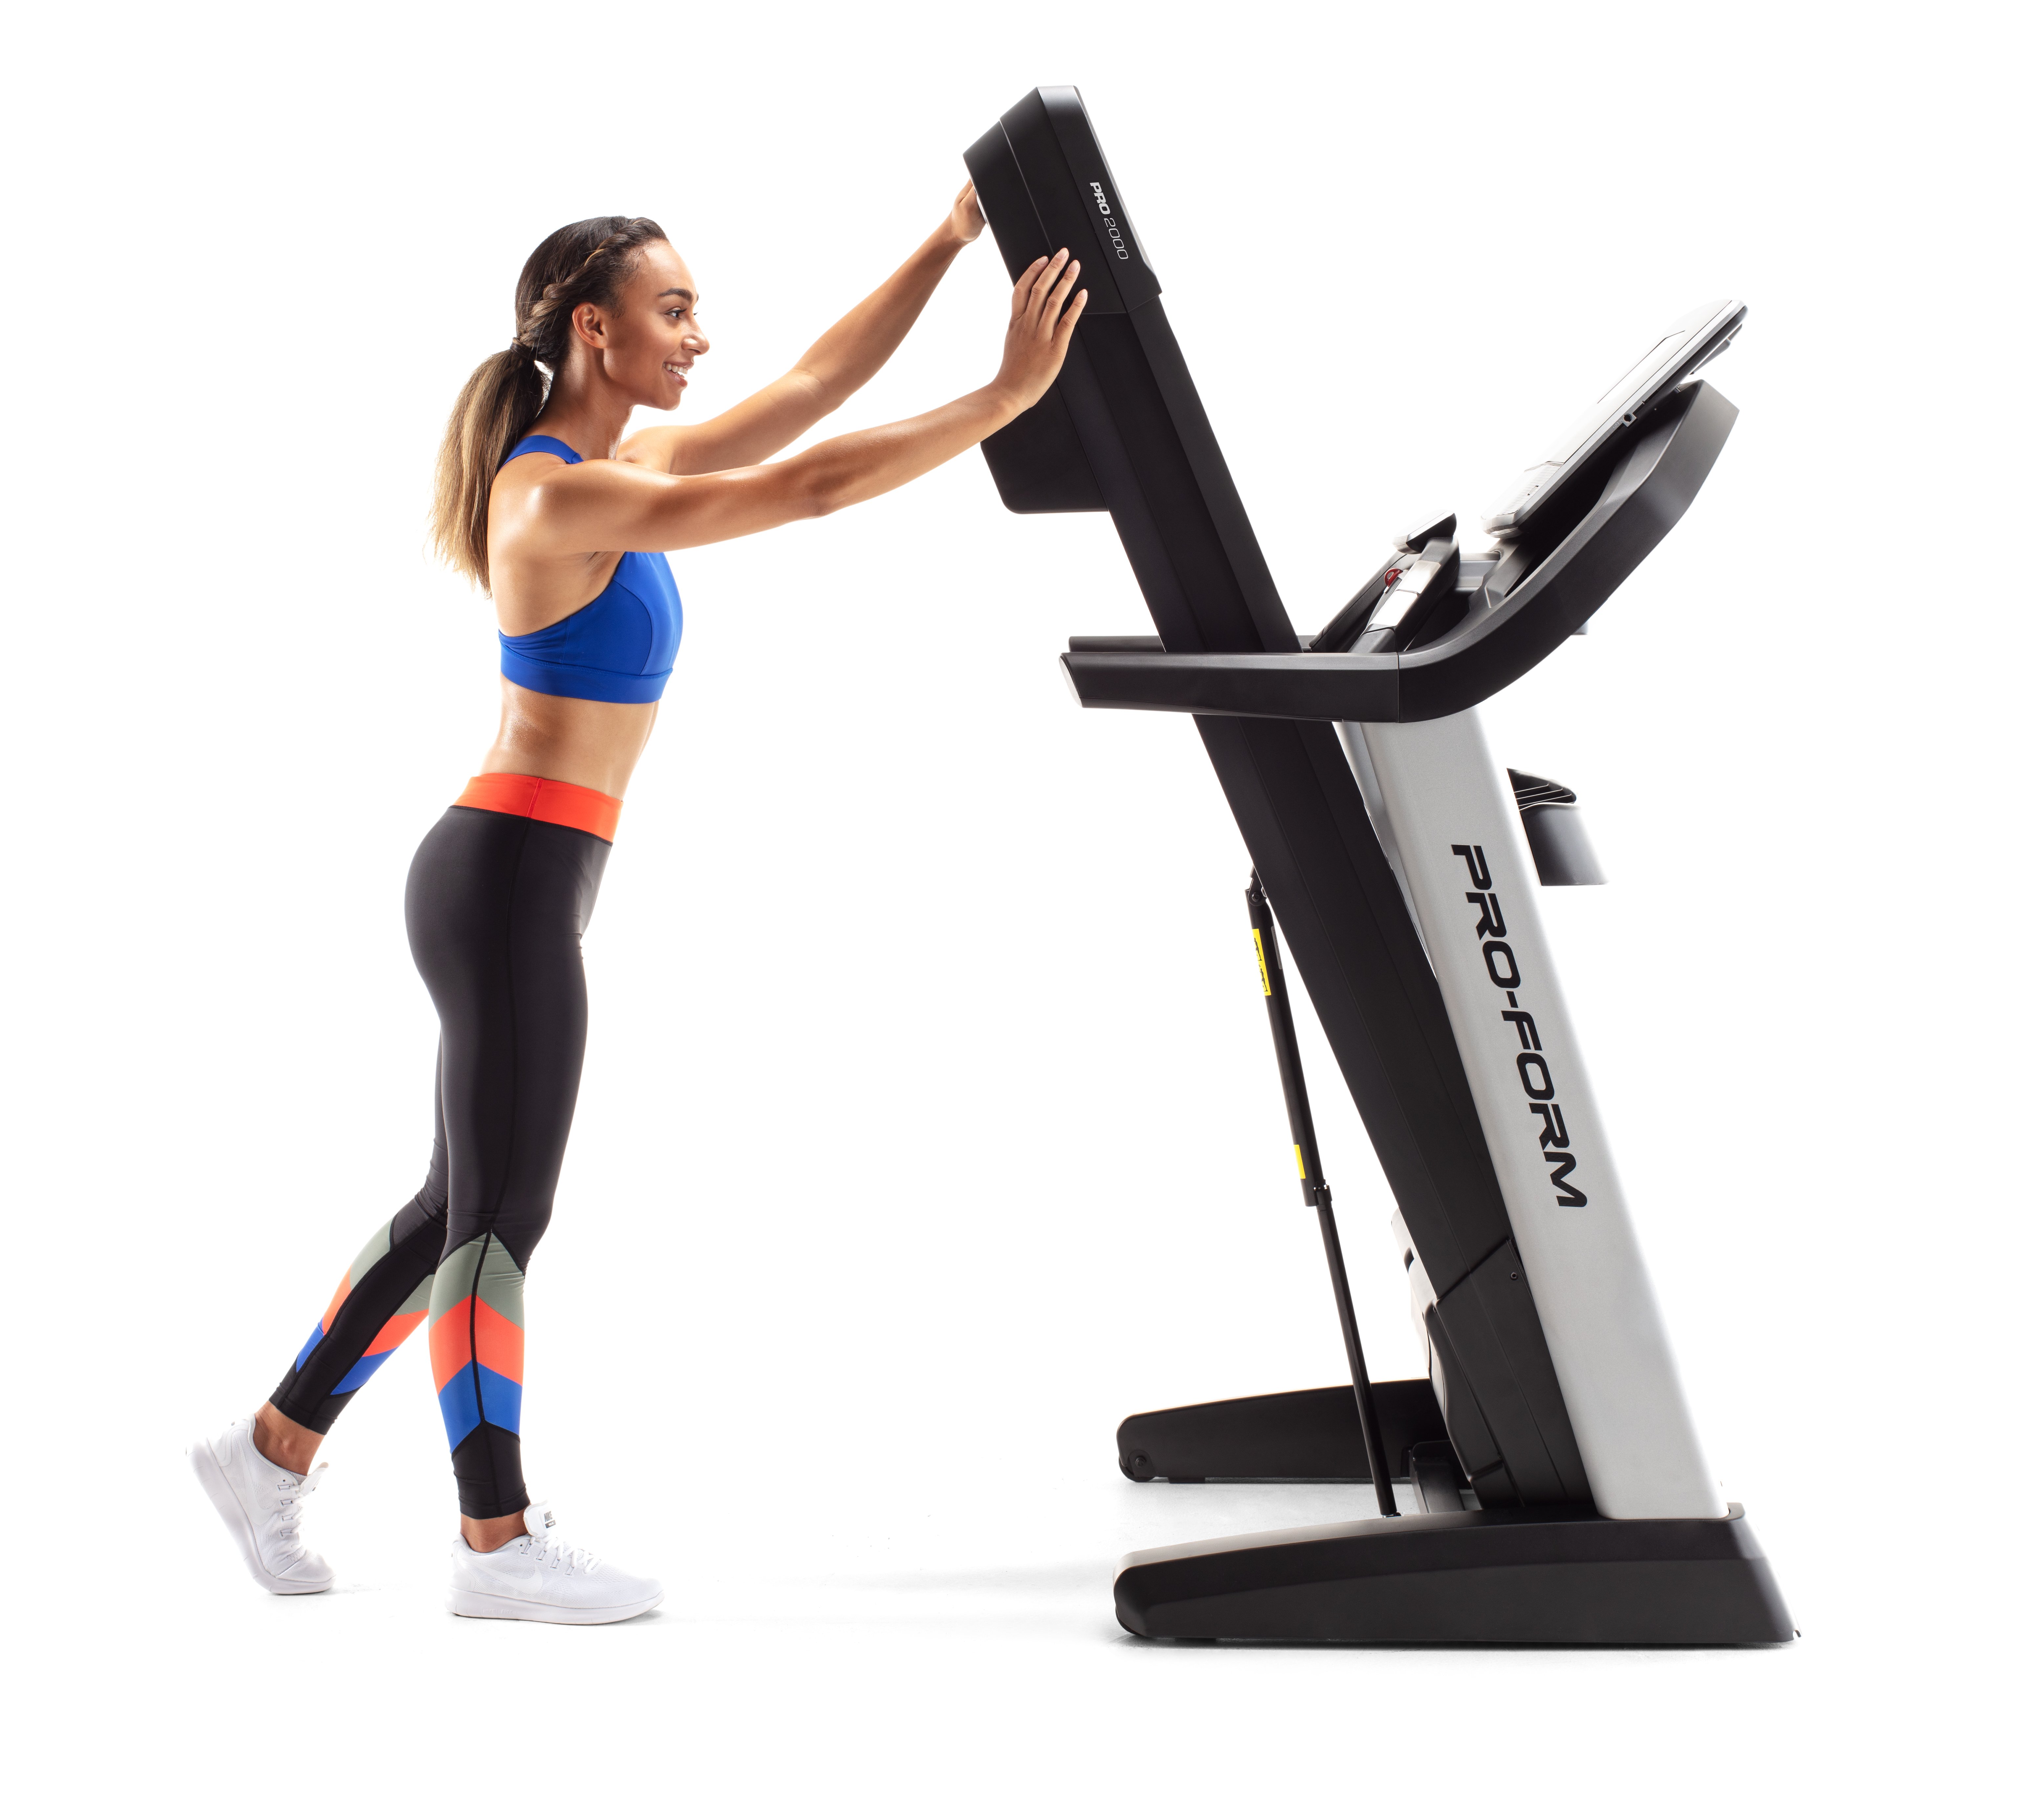 woman lifting proform treadmill with easylift assist